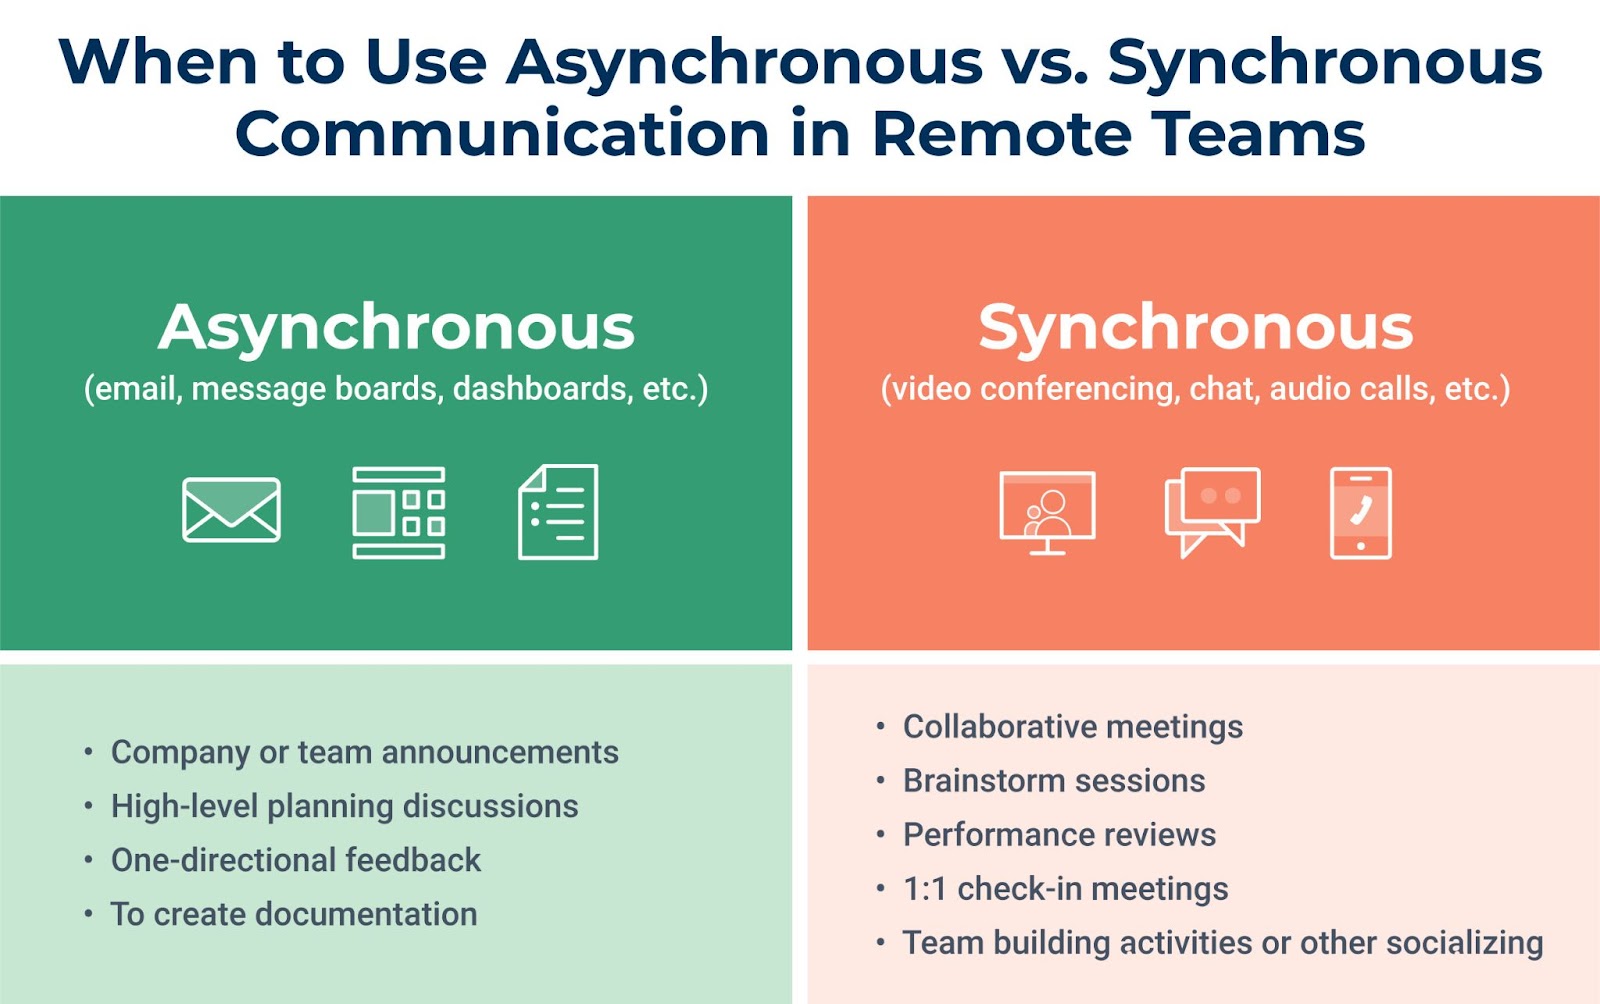 When to use asynchronous vs synchronous communication in remote teams